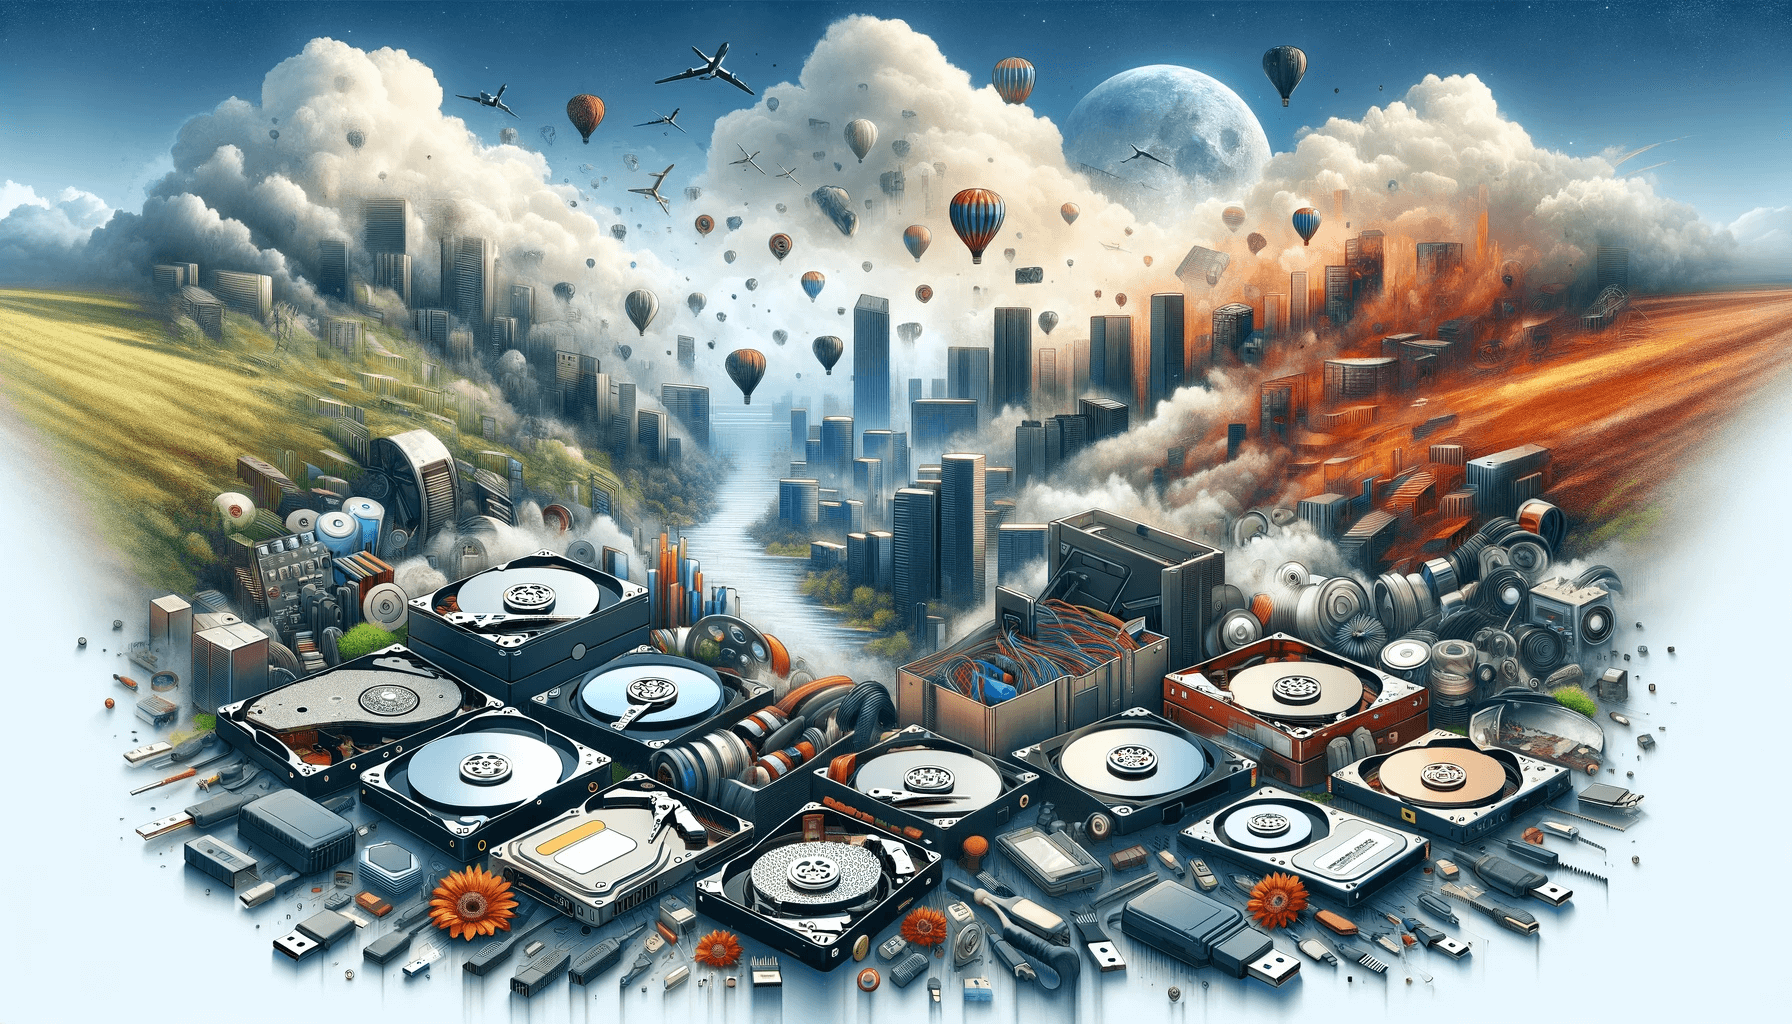 Surreal tech-themed landscape with city and nature elements.